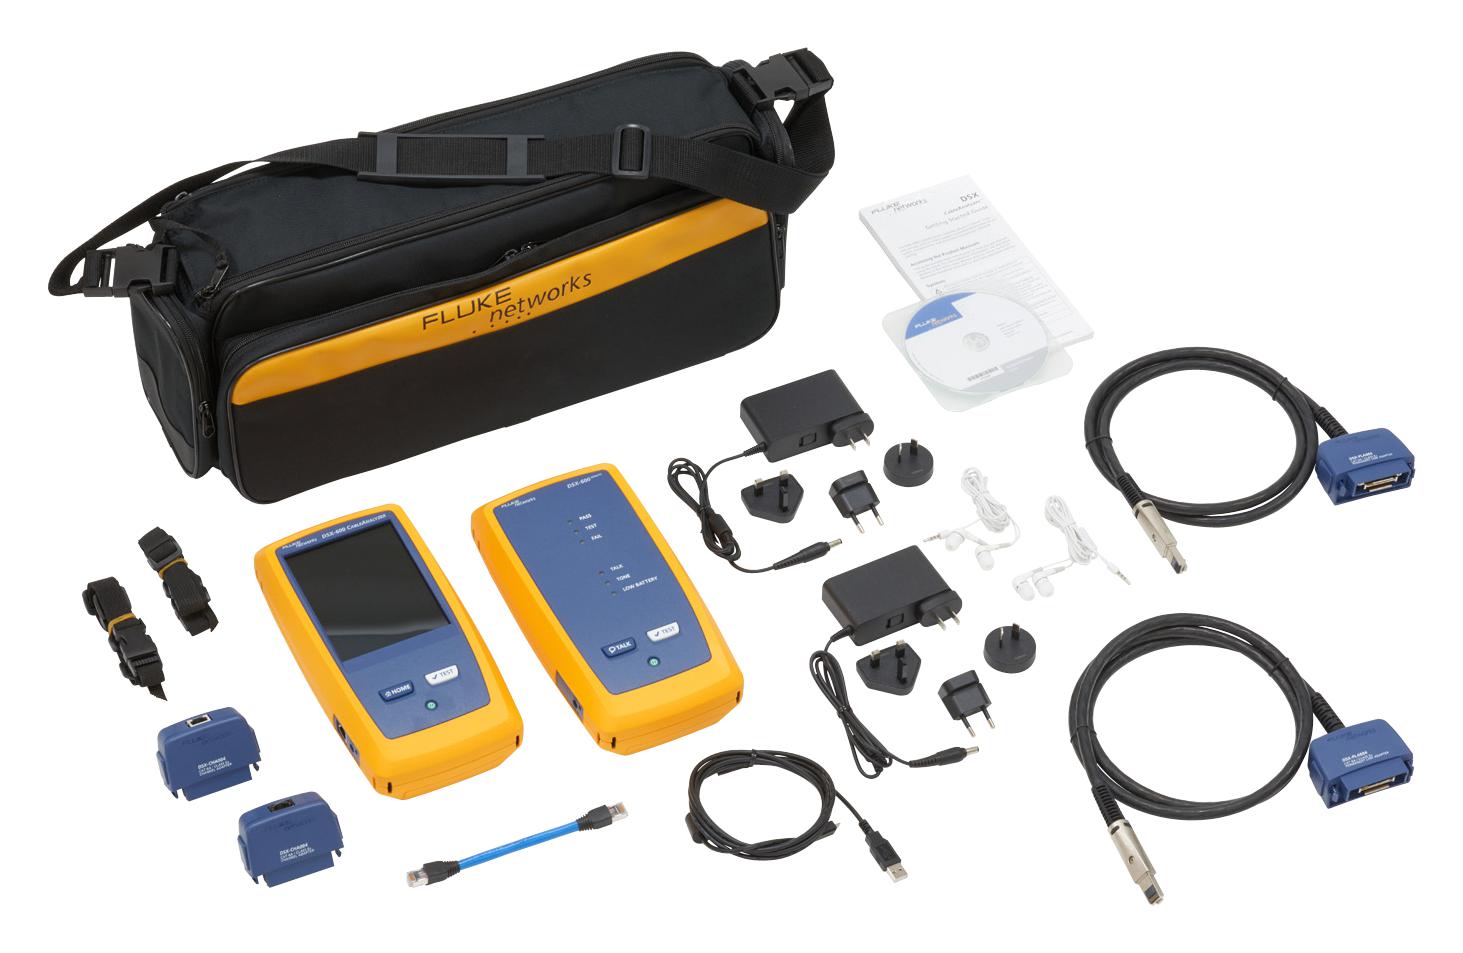 DSX-602-PRO INT NETWORK CABLE ANALYSER, WIFI, LCD FLUKE NETWORKS